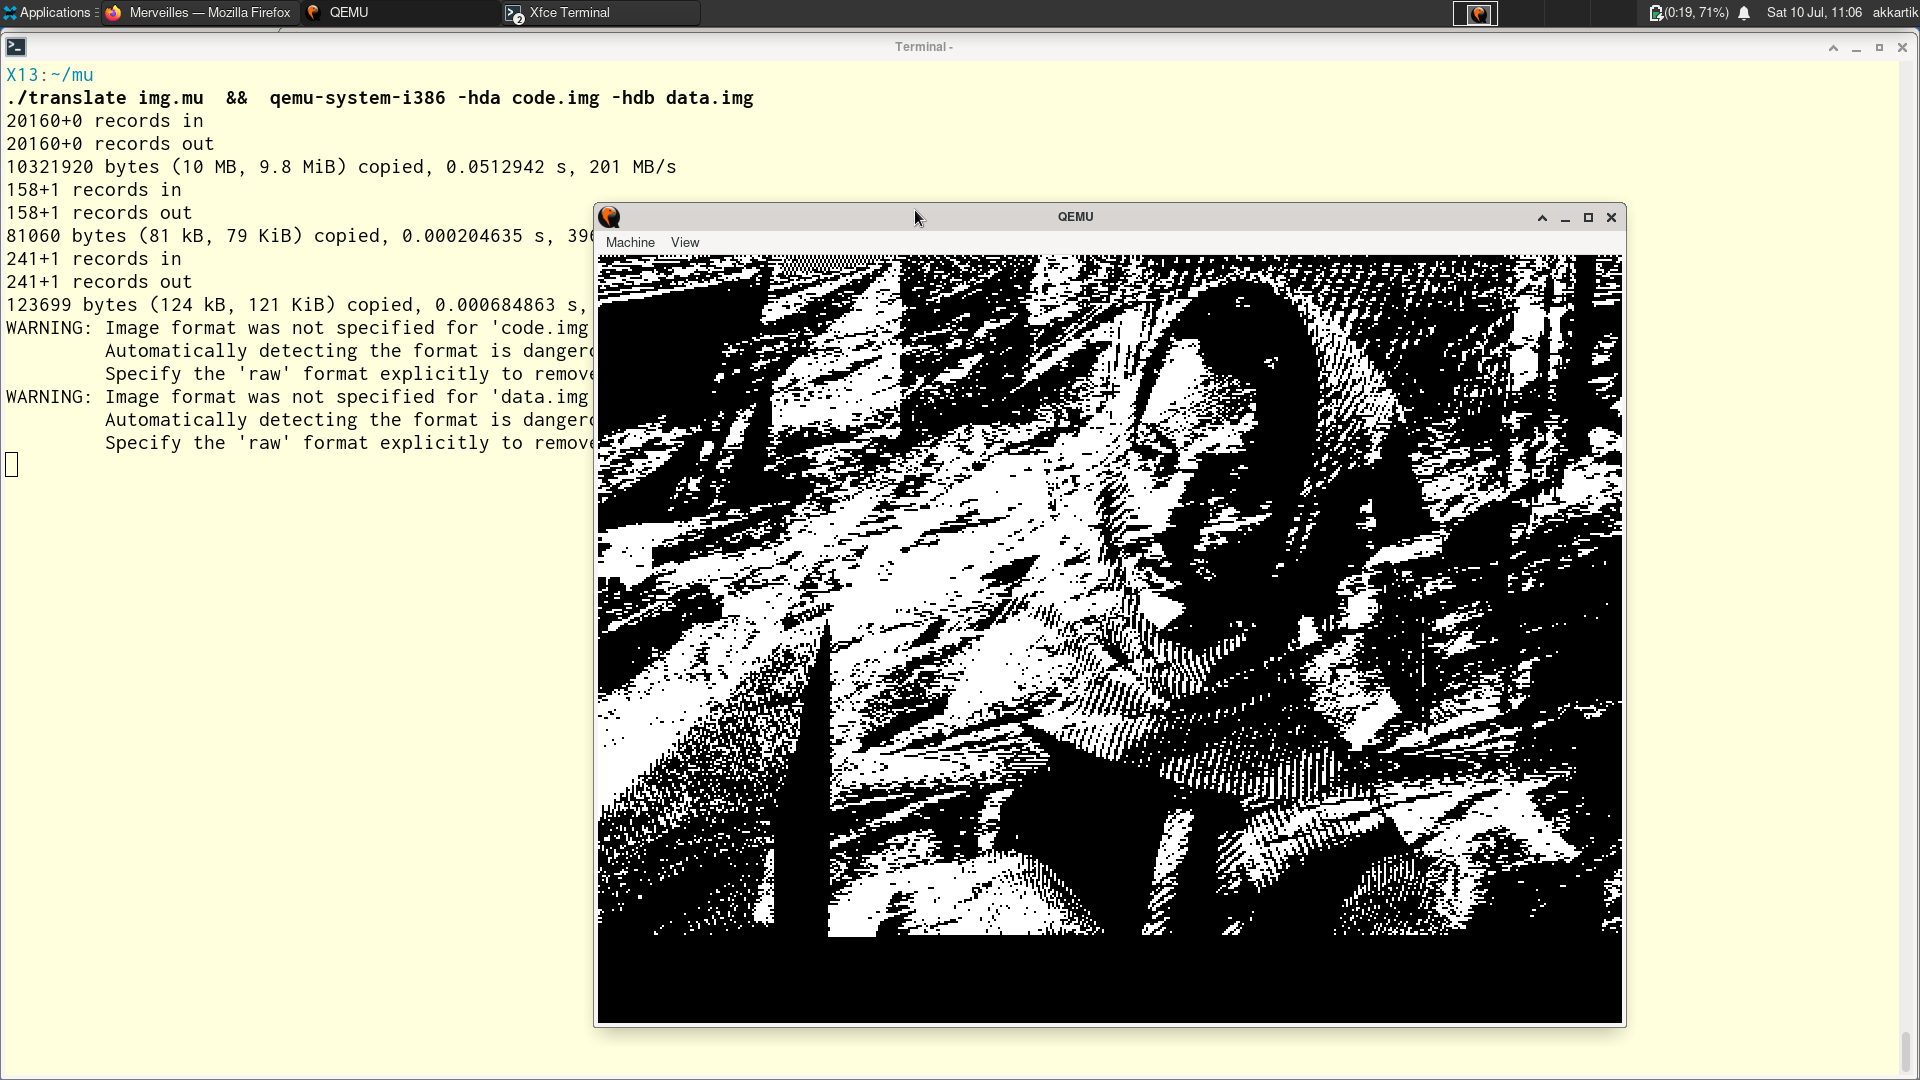 a screenshot showing a Qemu window containing a dithered version using just black and white pixels.